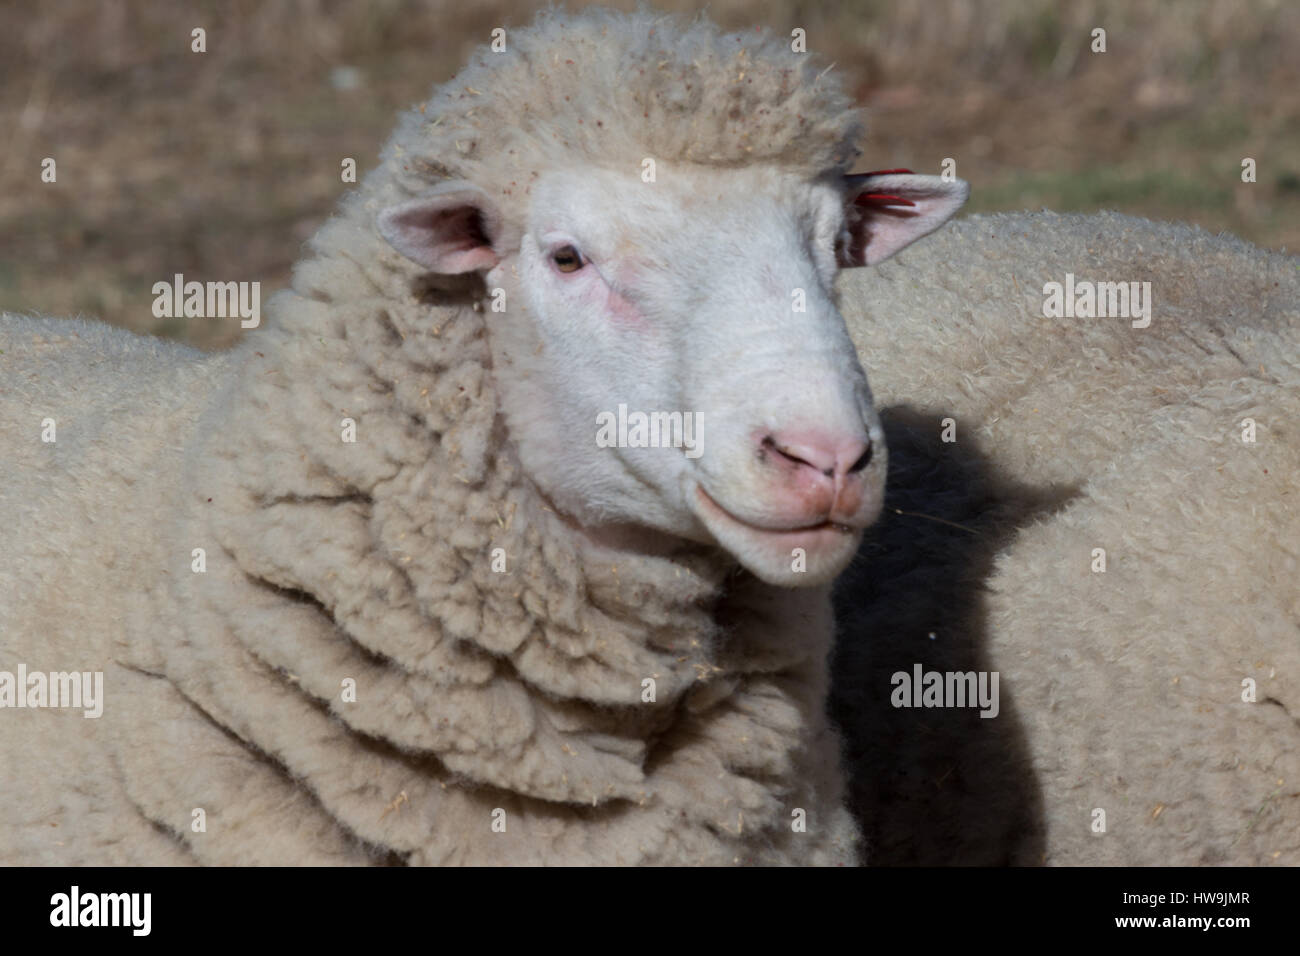 A photograph of a sheep that appears to be happay and smiling on dry Australian farm in Central NSW. Stock Photo